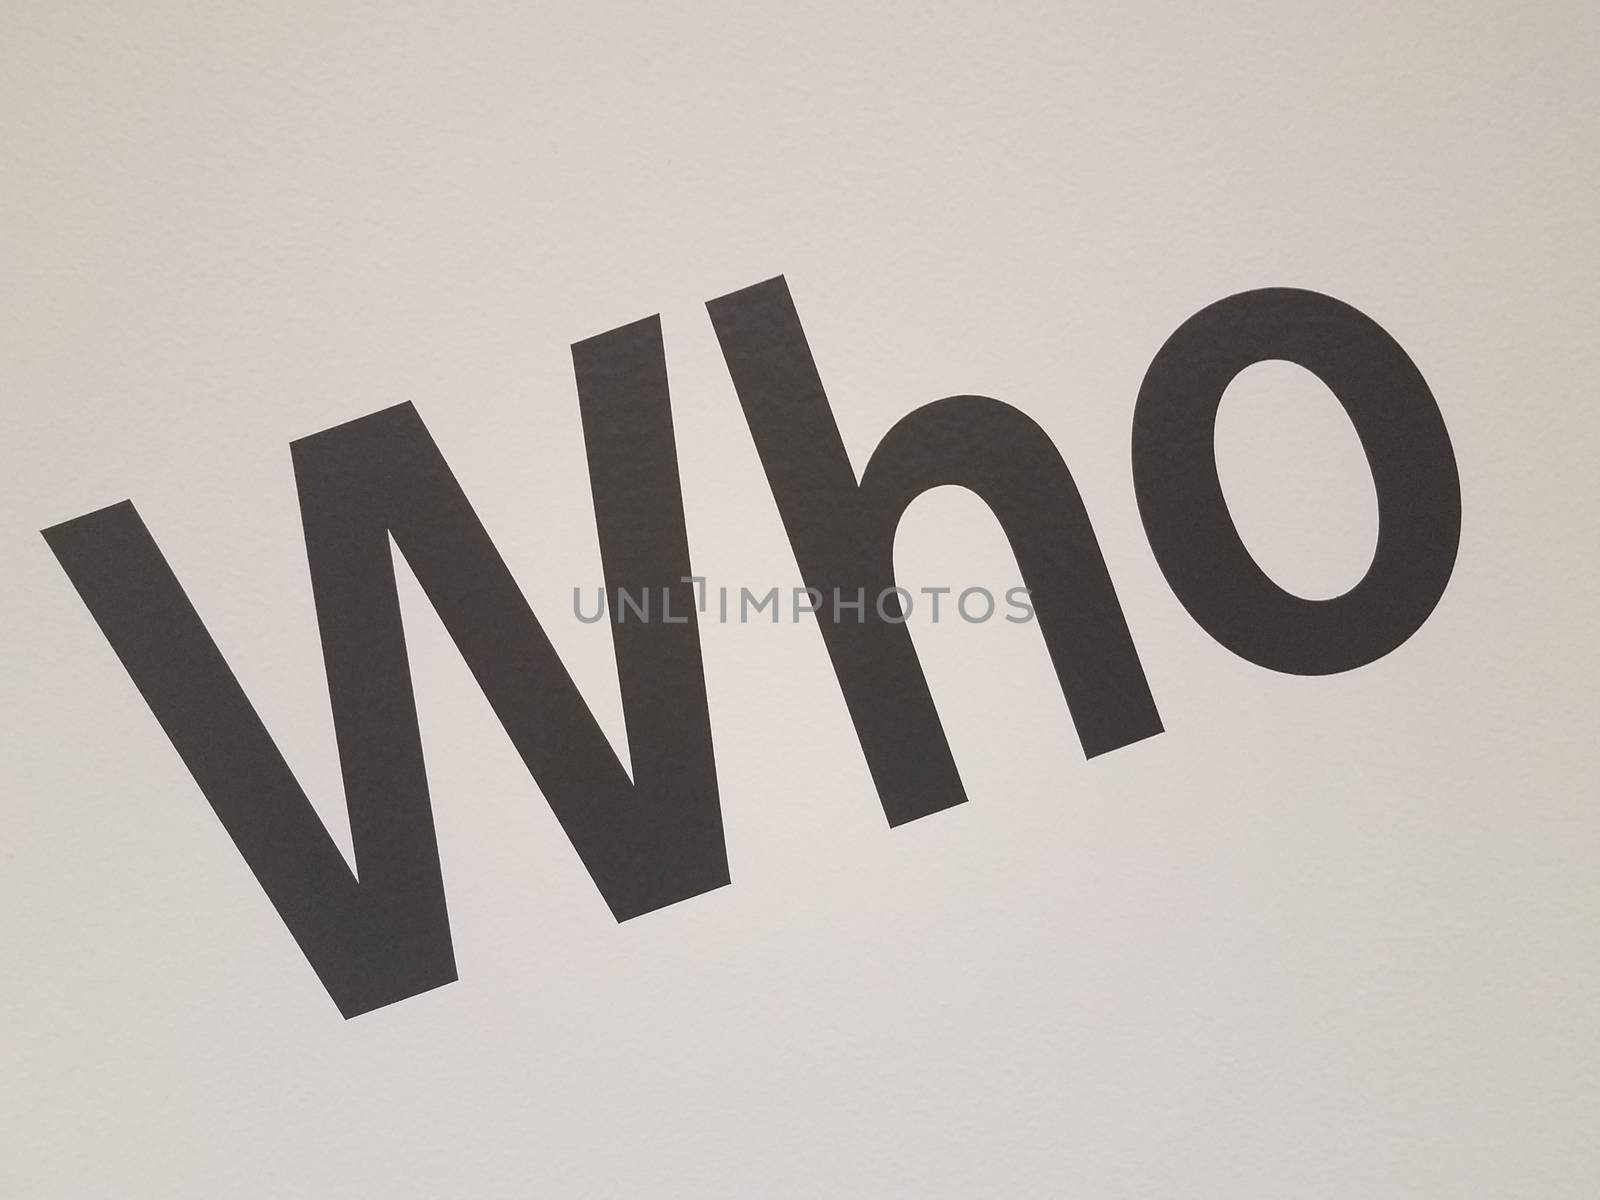 who sign with black letters on white paper by stockphotofan1